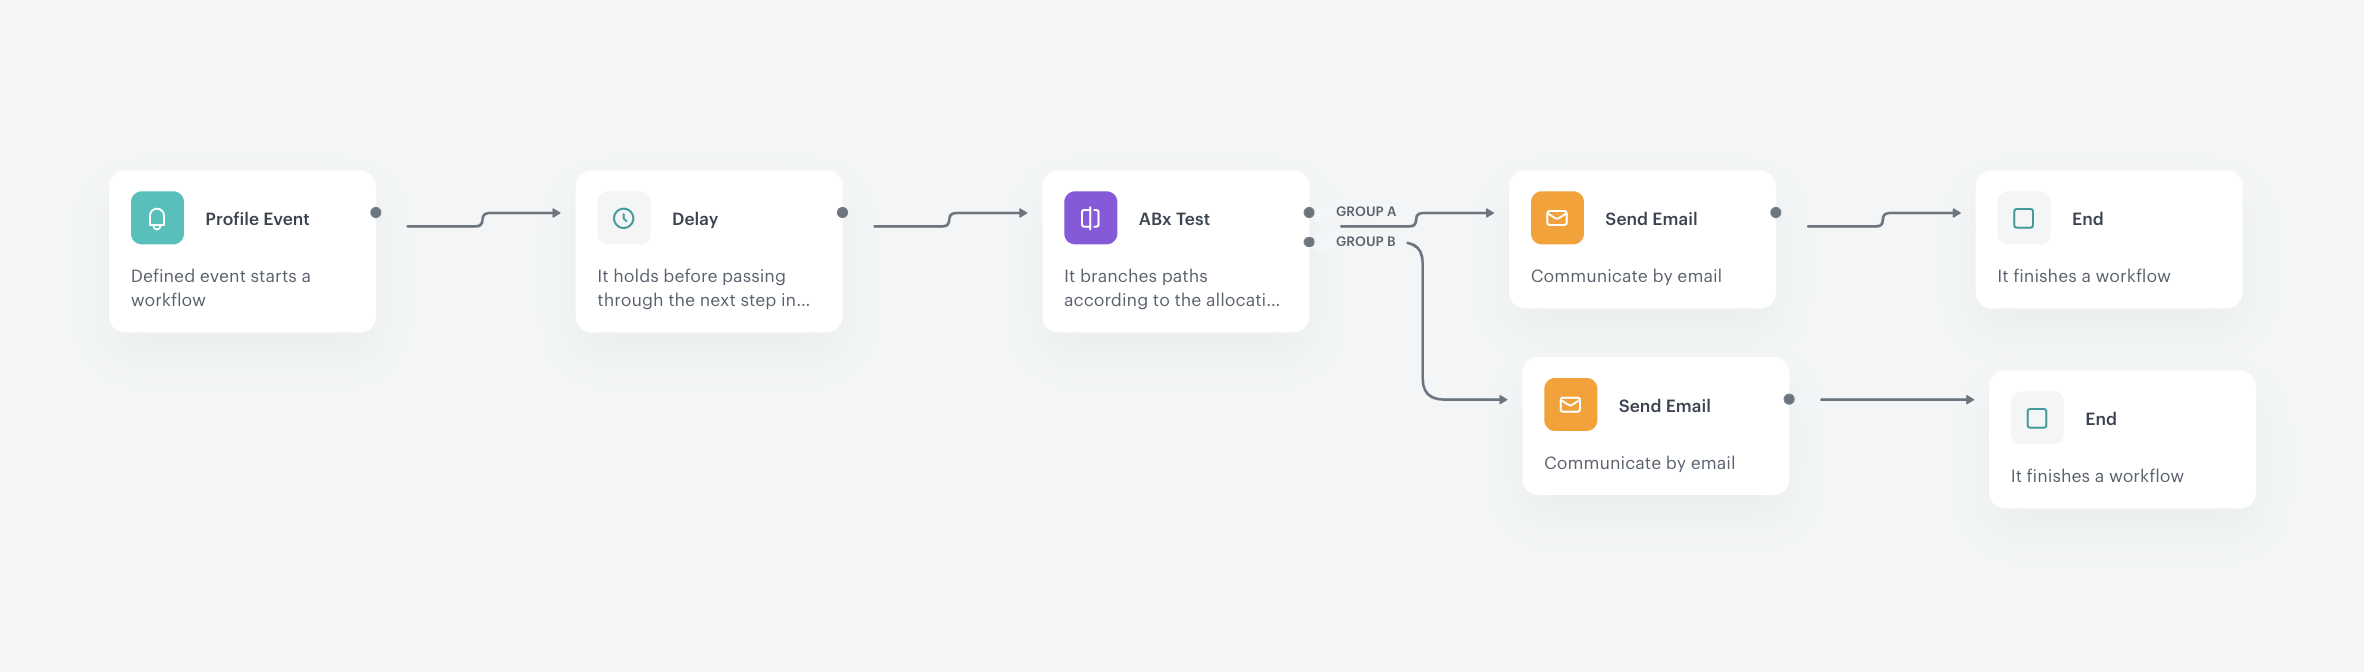 The configuration of the workflow with A/B testing